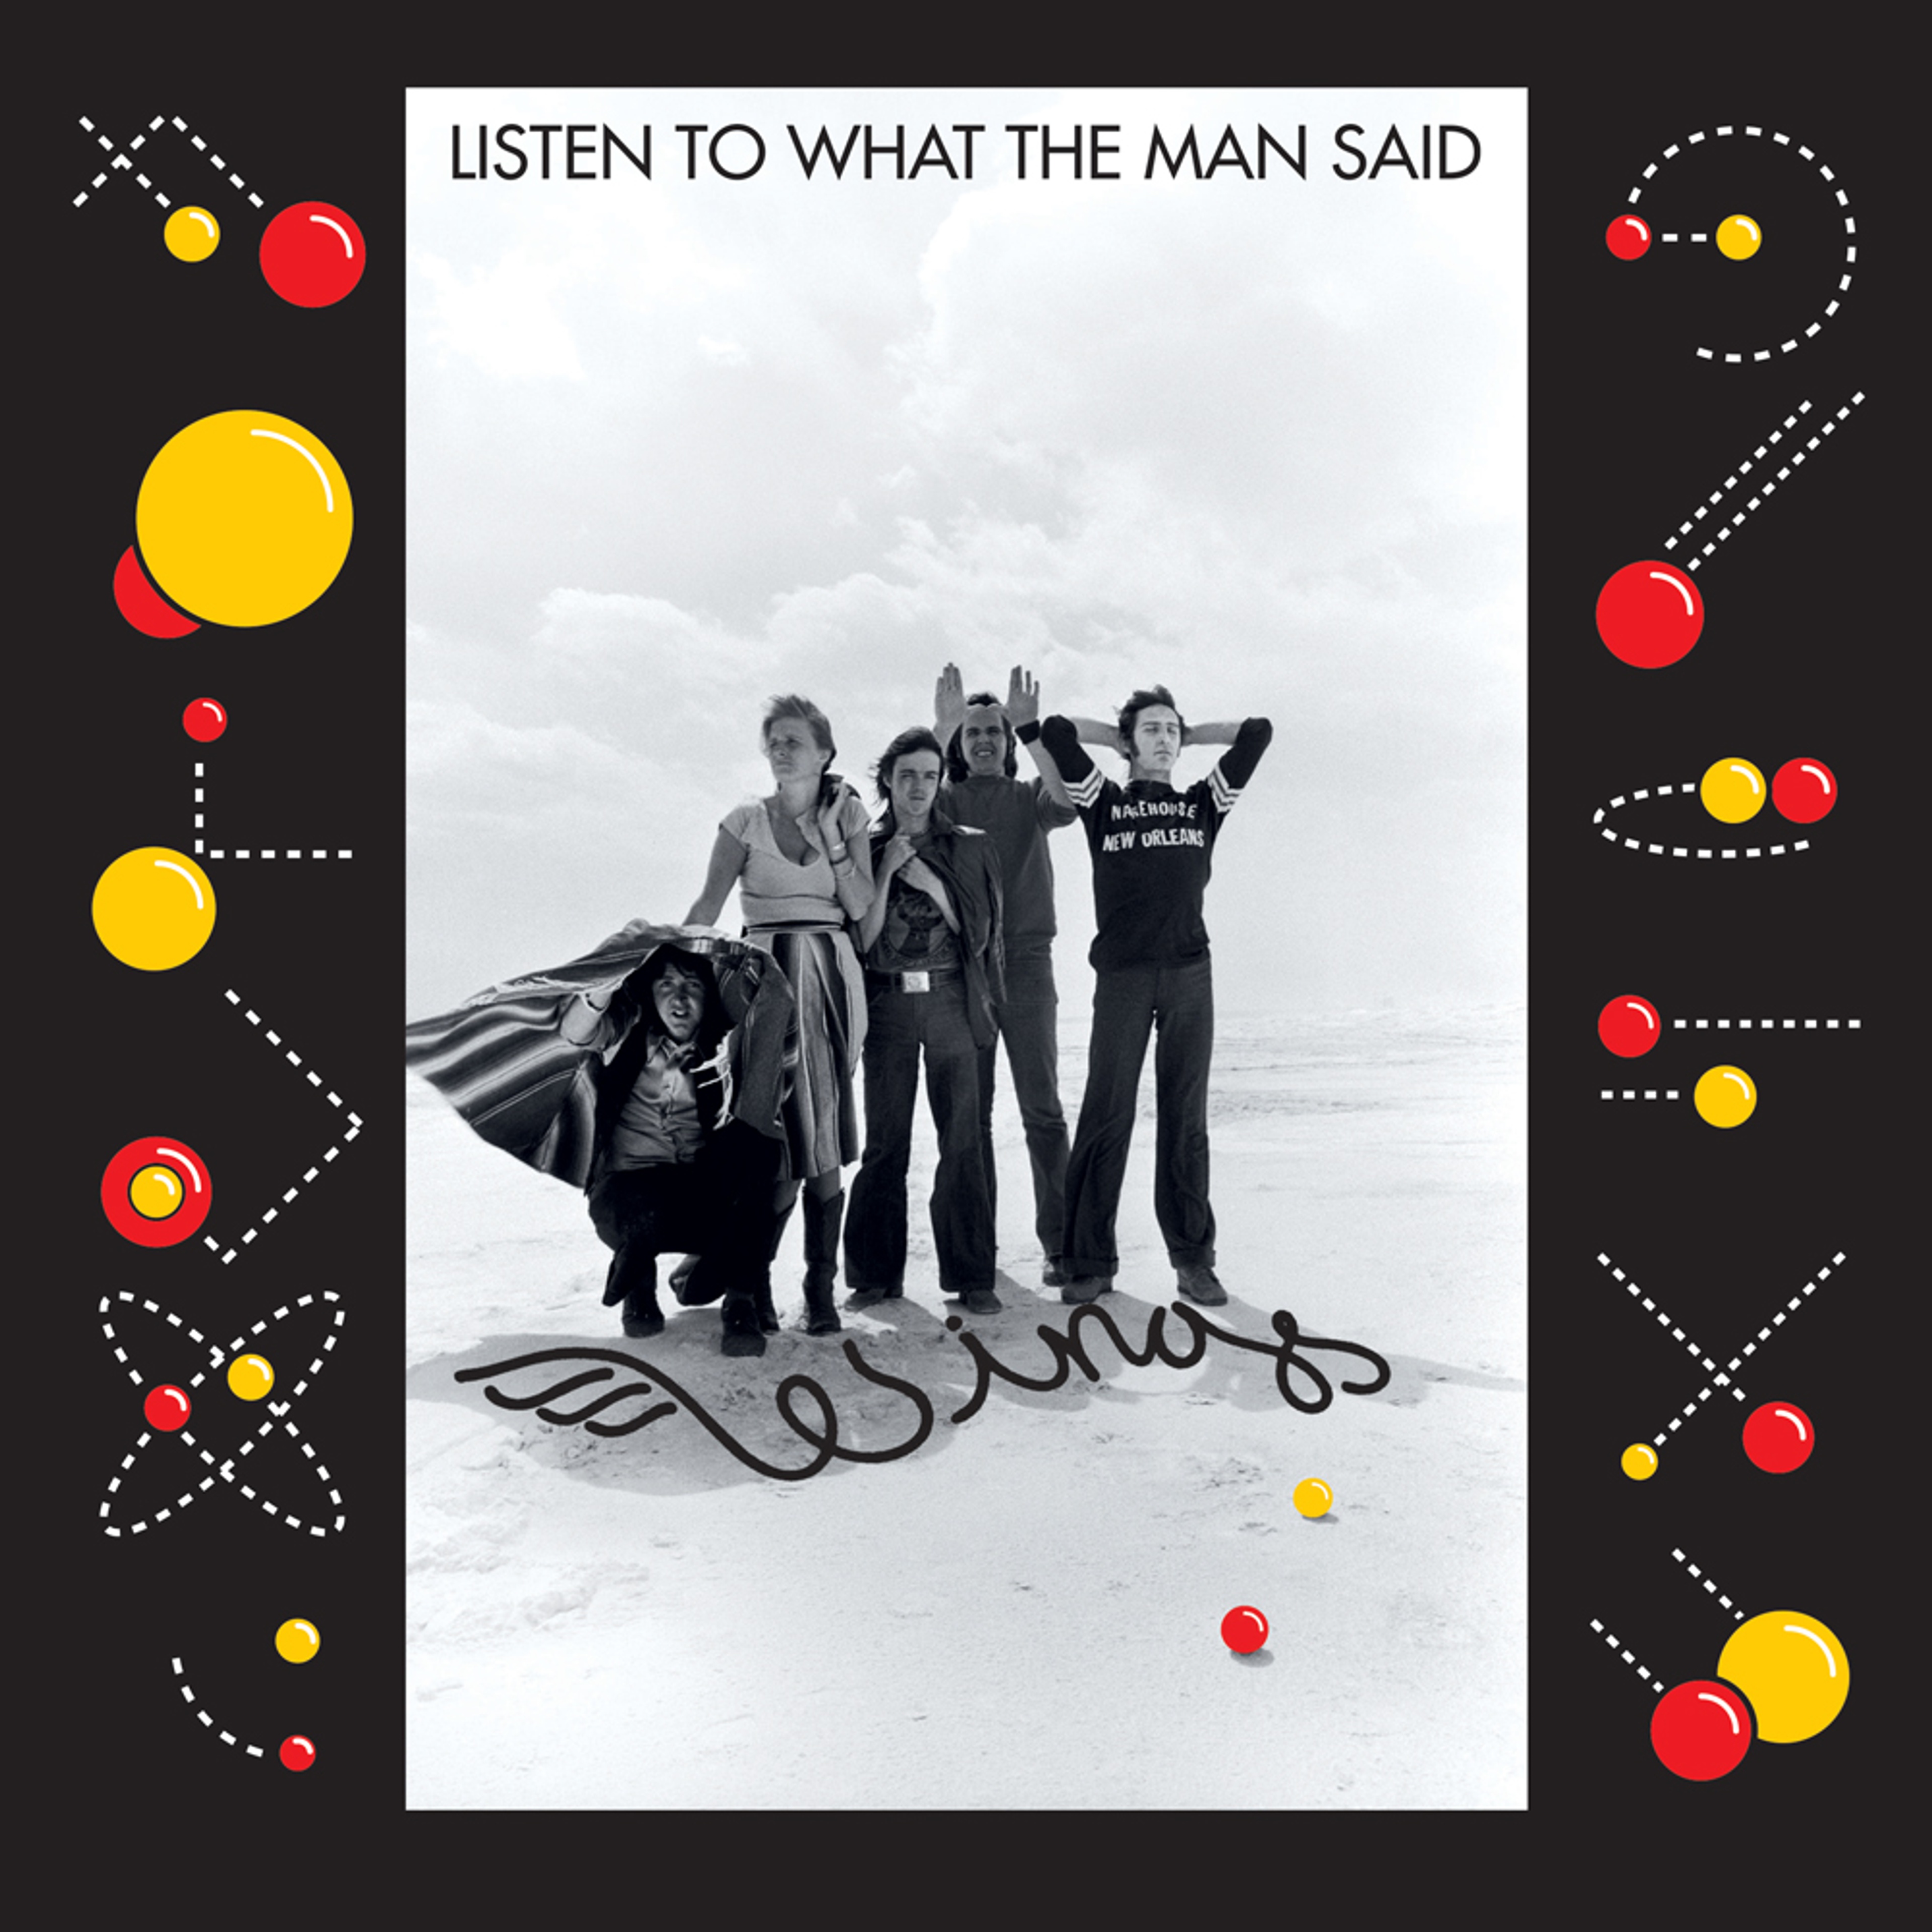 “Listen to What the Man Said” Single artwork as featured in 'The 7" Singles Box'